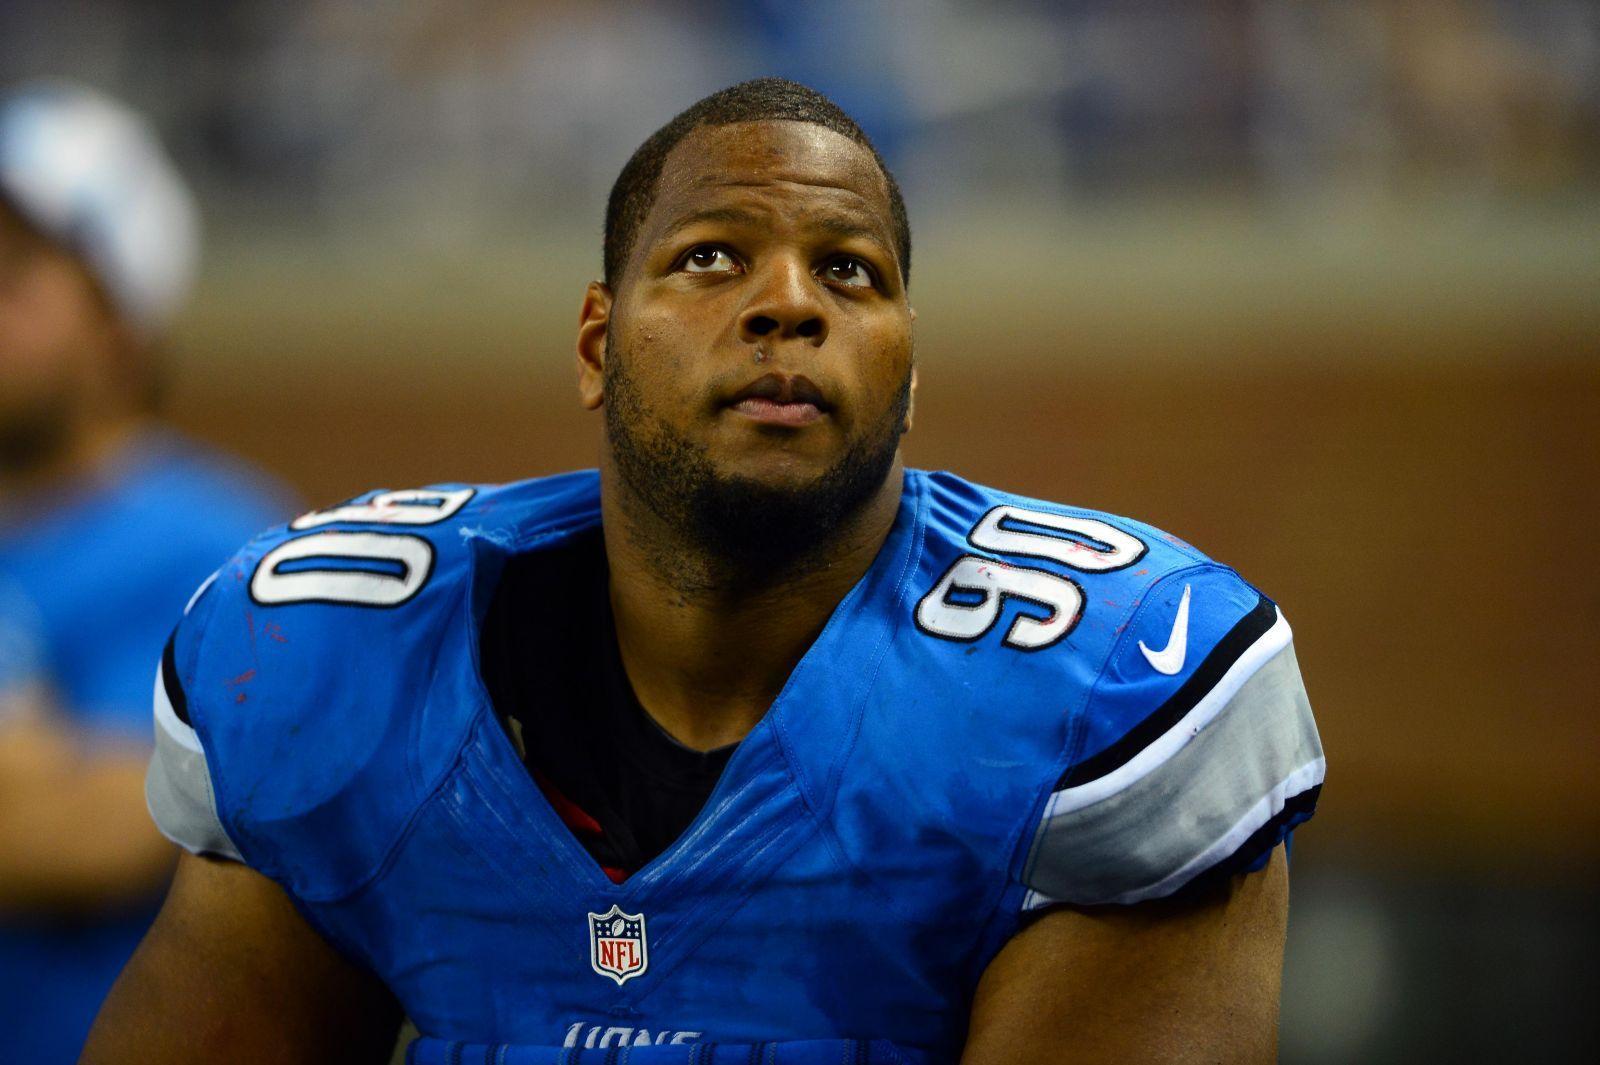 Ndamukong Suh NFL Player Wallpaper. Download High Quality